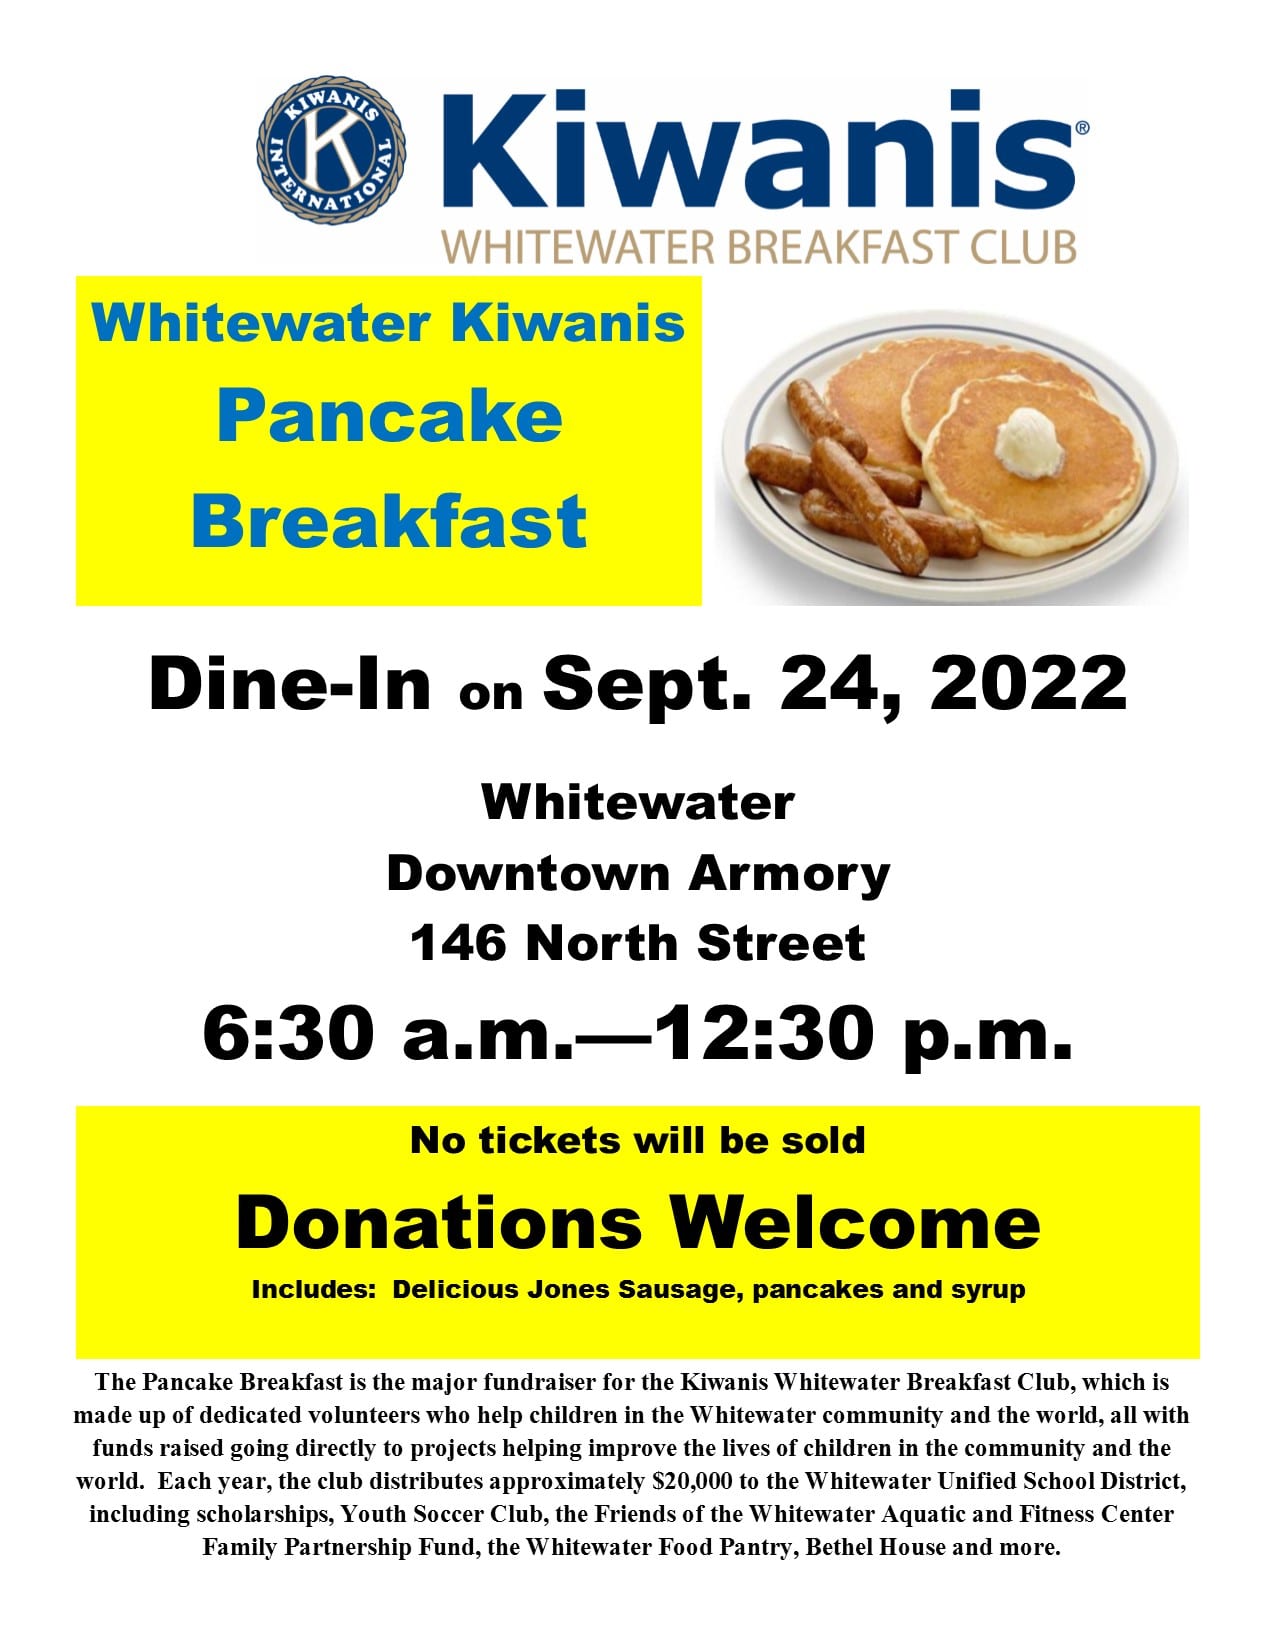 Kiwanis Pancake Breakfast at Old Armory this Saturday from 630 a.m. to